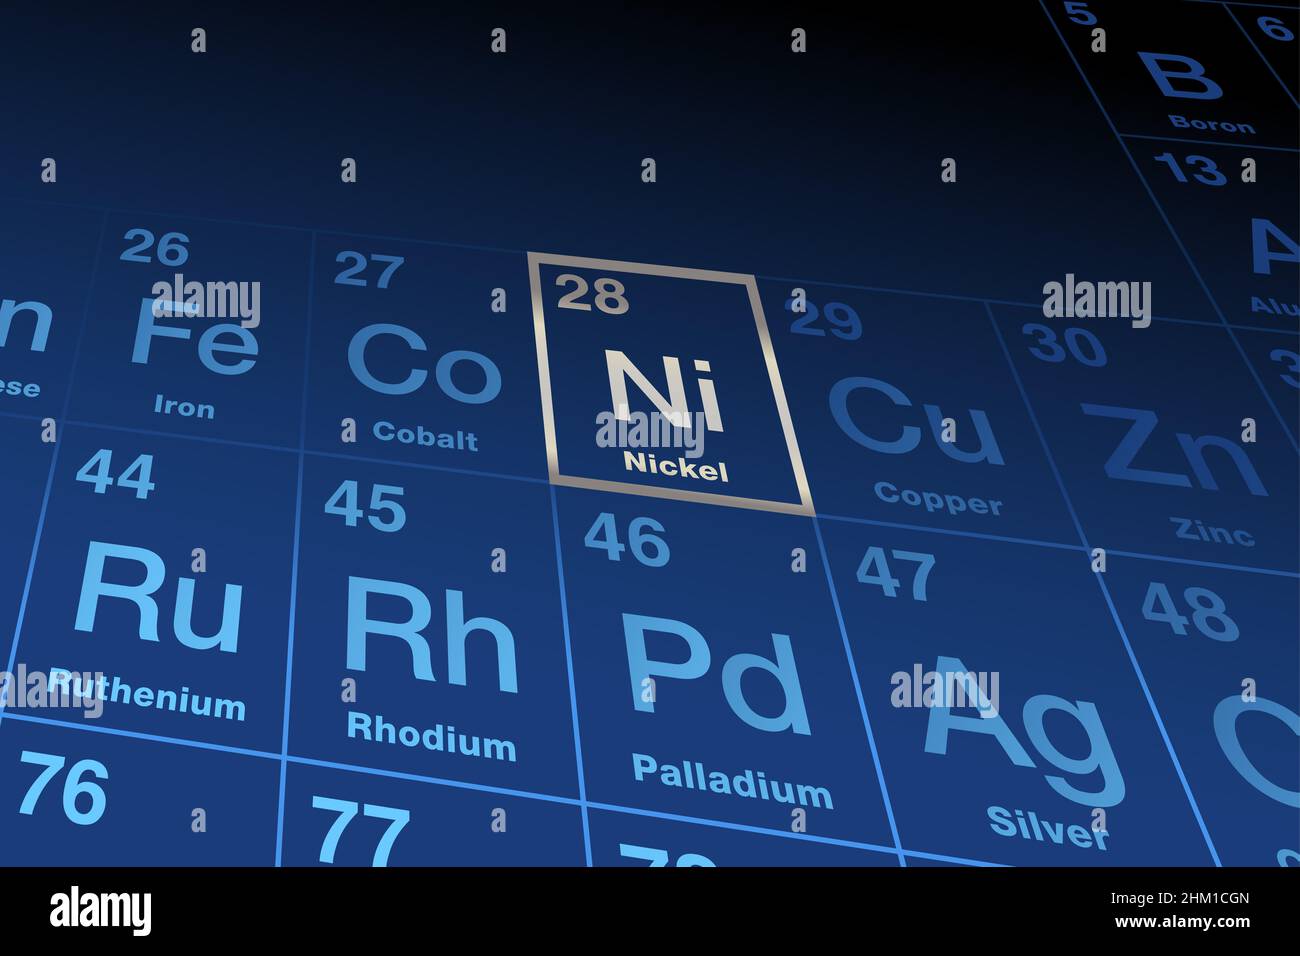 Element nickel on the periodic table of elements. Ferromagnetic transition metal, with element symbol Ni, and atomic number 28. Stock Photo